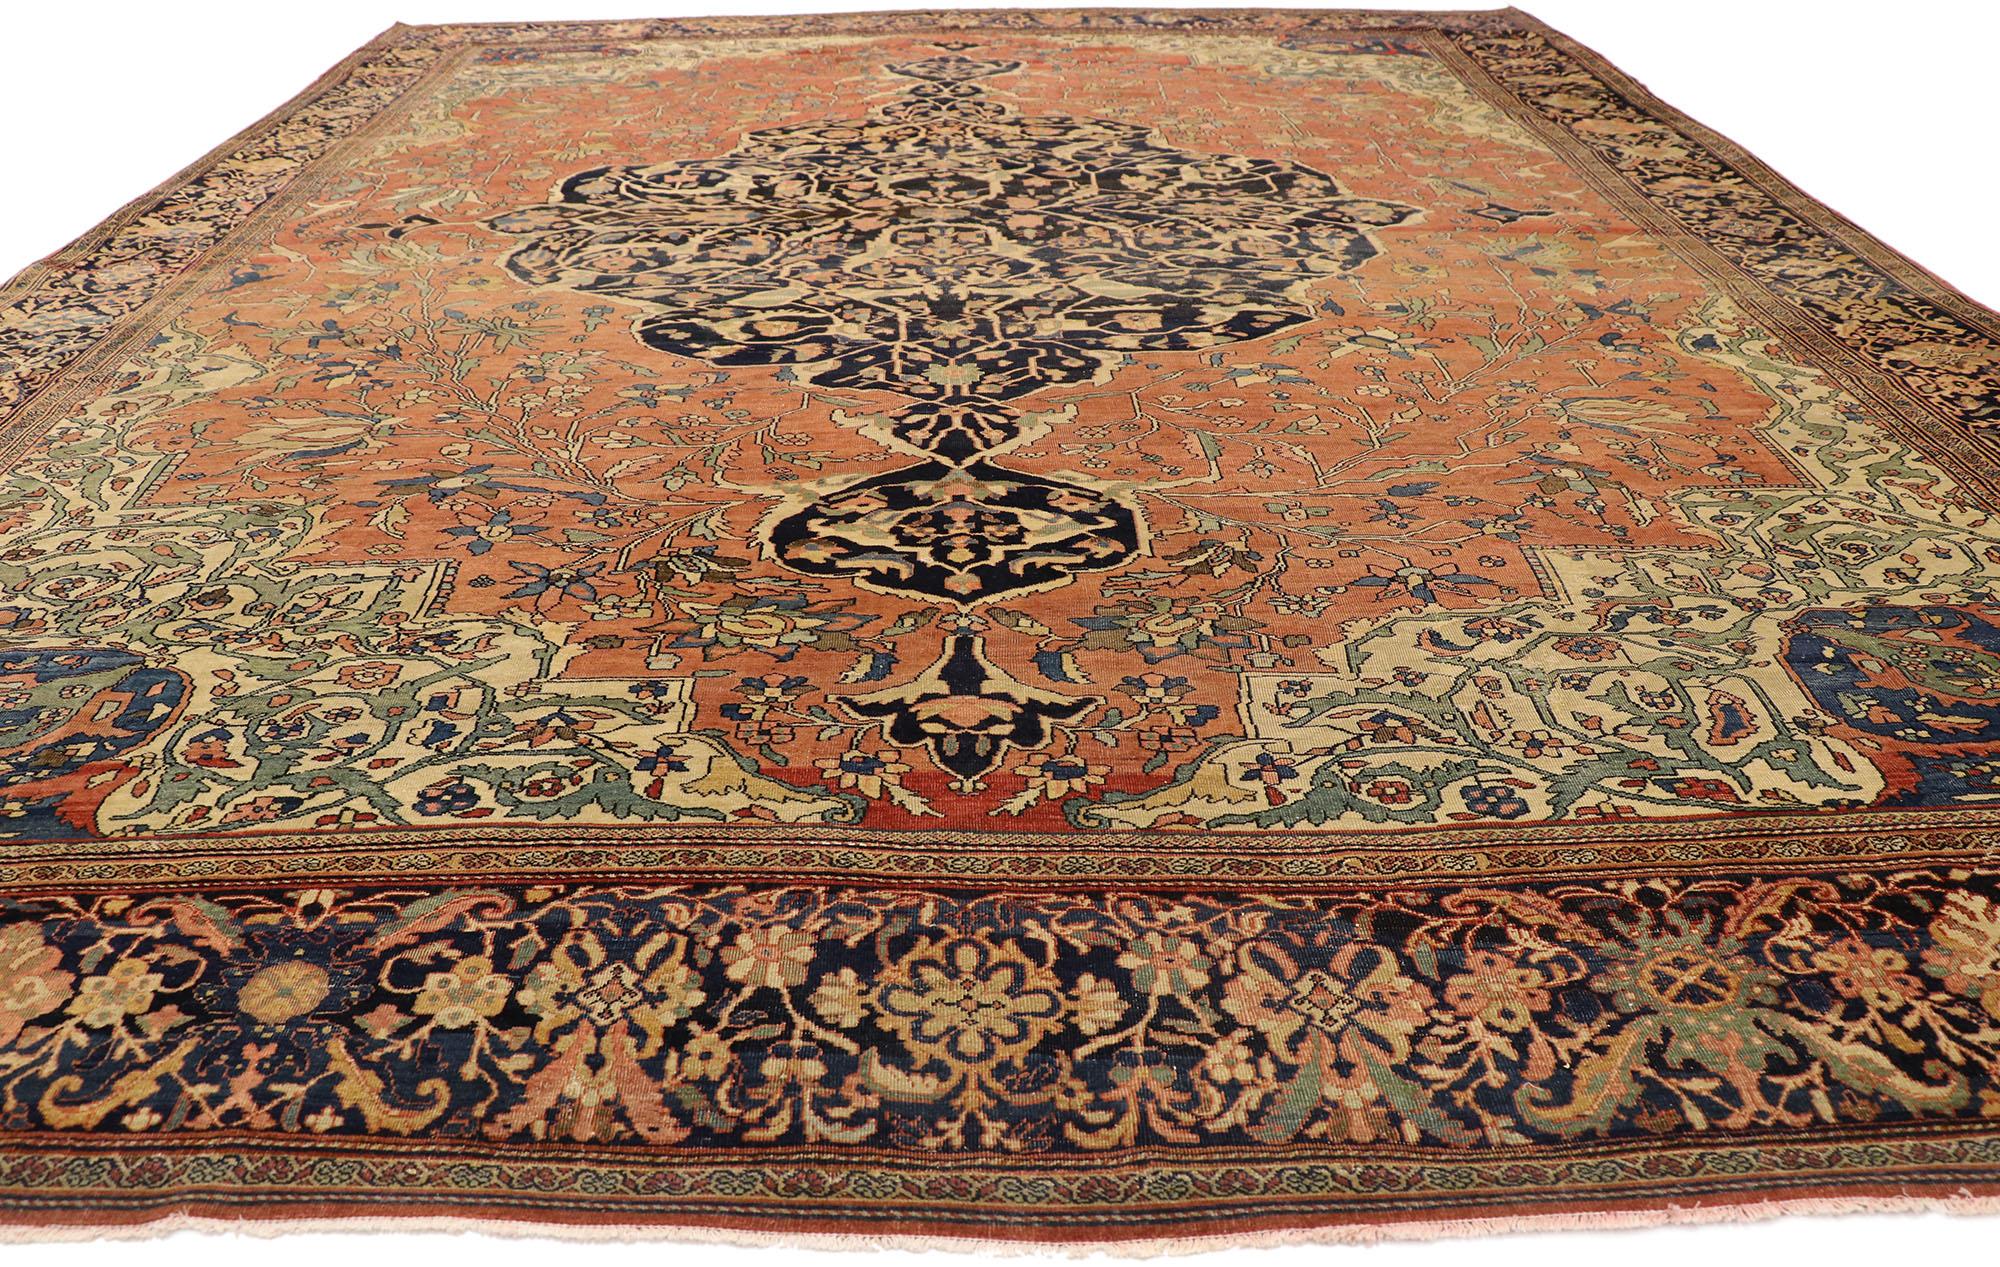 76780 Antique Persian Farahan Sarouk Rug,10'06 x 13'07. ​A Persian Farahan rug, also known as Farahan Sarouk, is a hand-knotted rug originating from the Farahan region in Iran, renowned for its intricate designs, rich color palette, and high-quality